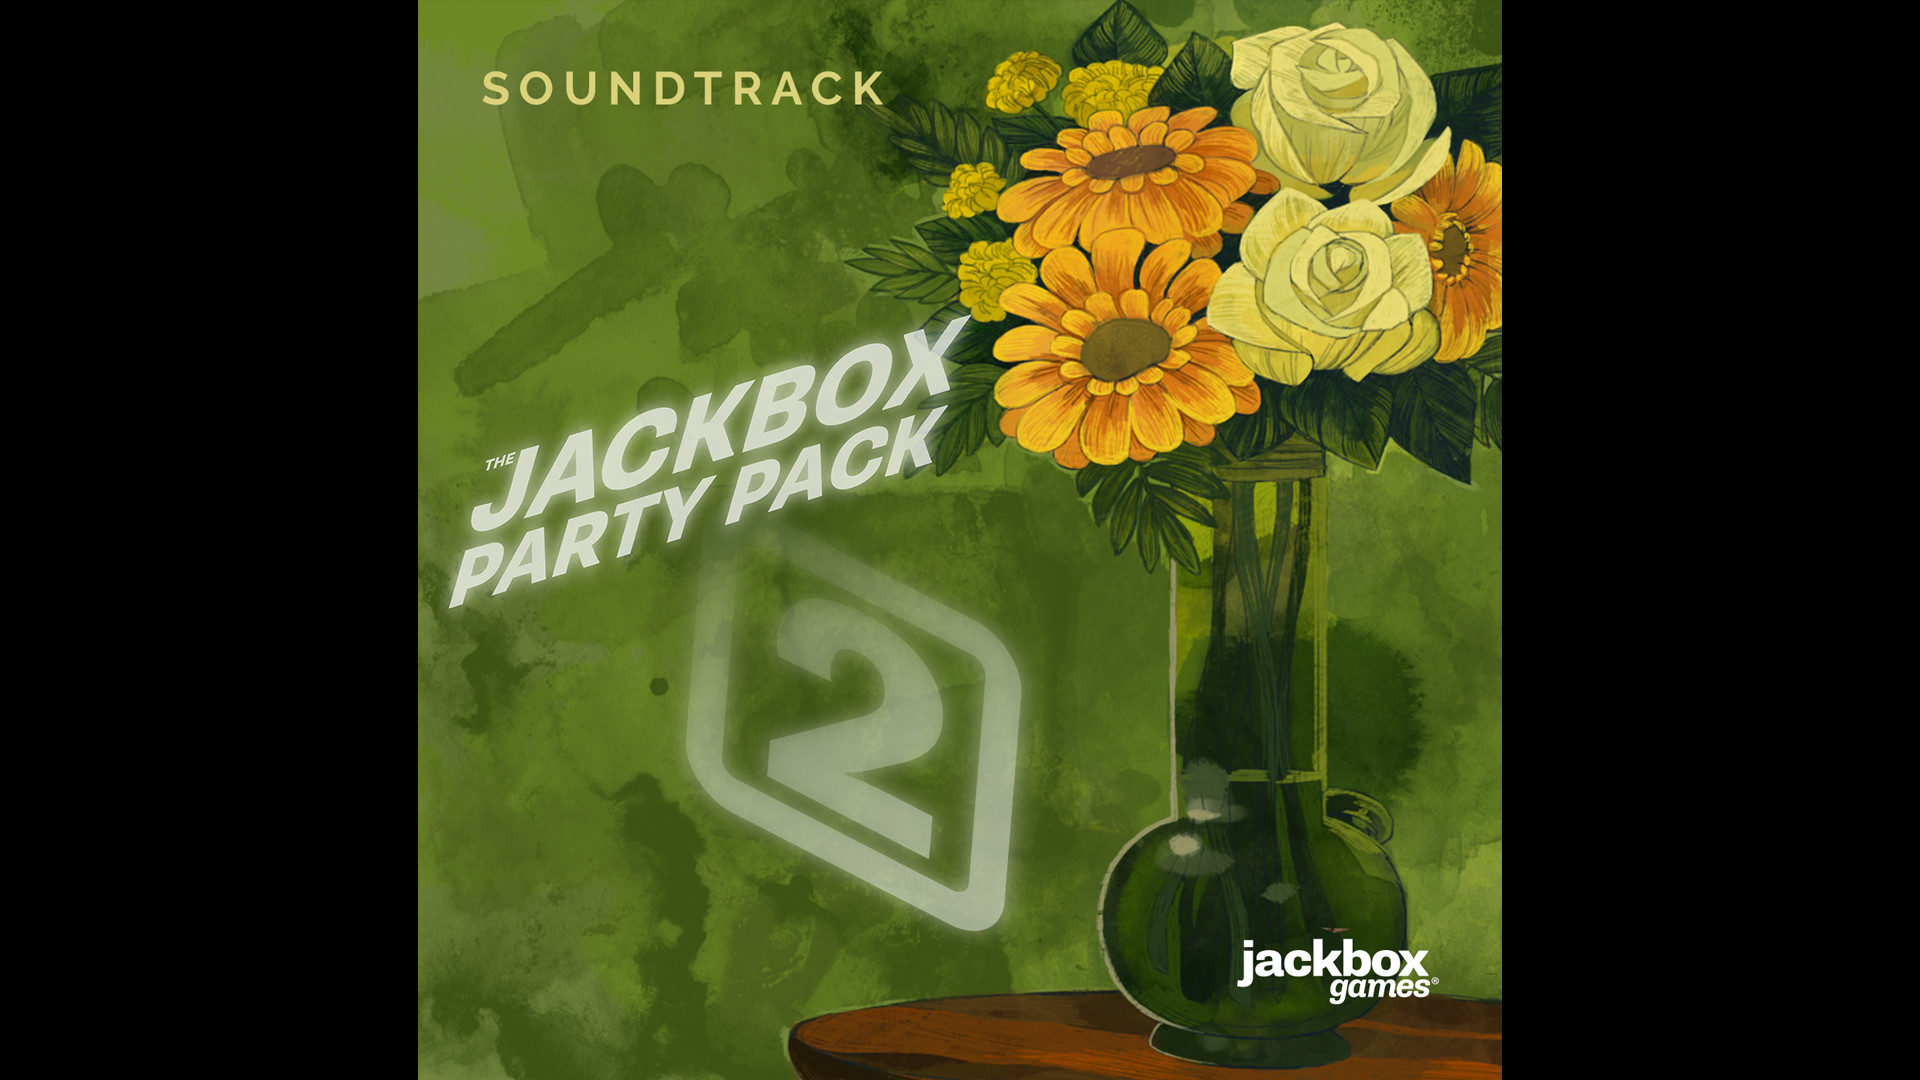 The Jackbox Party Pack 2 - Soundtrack Featured Screenshot #1